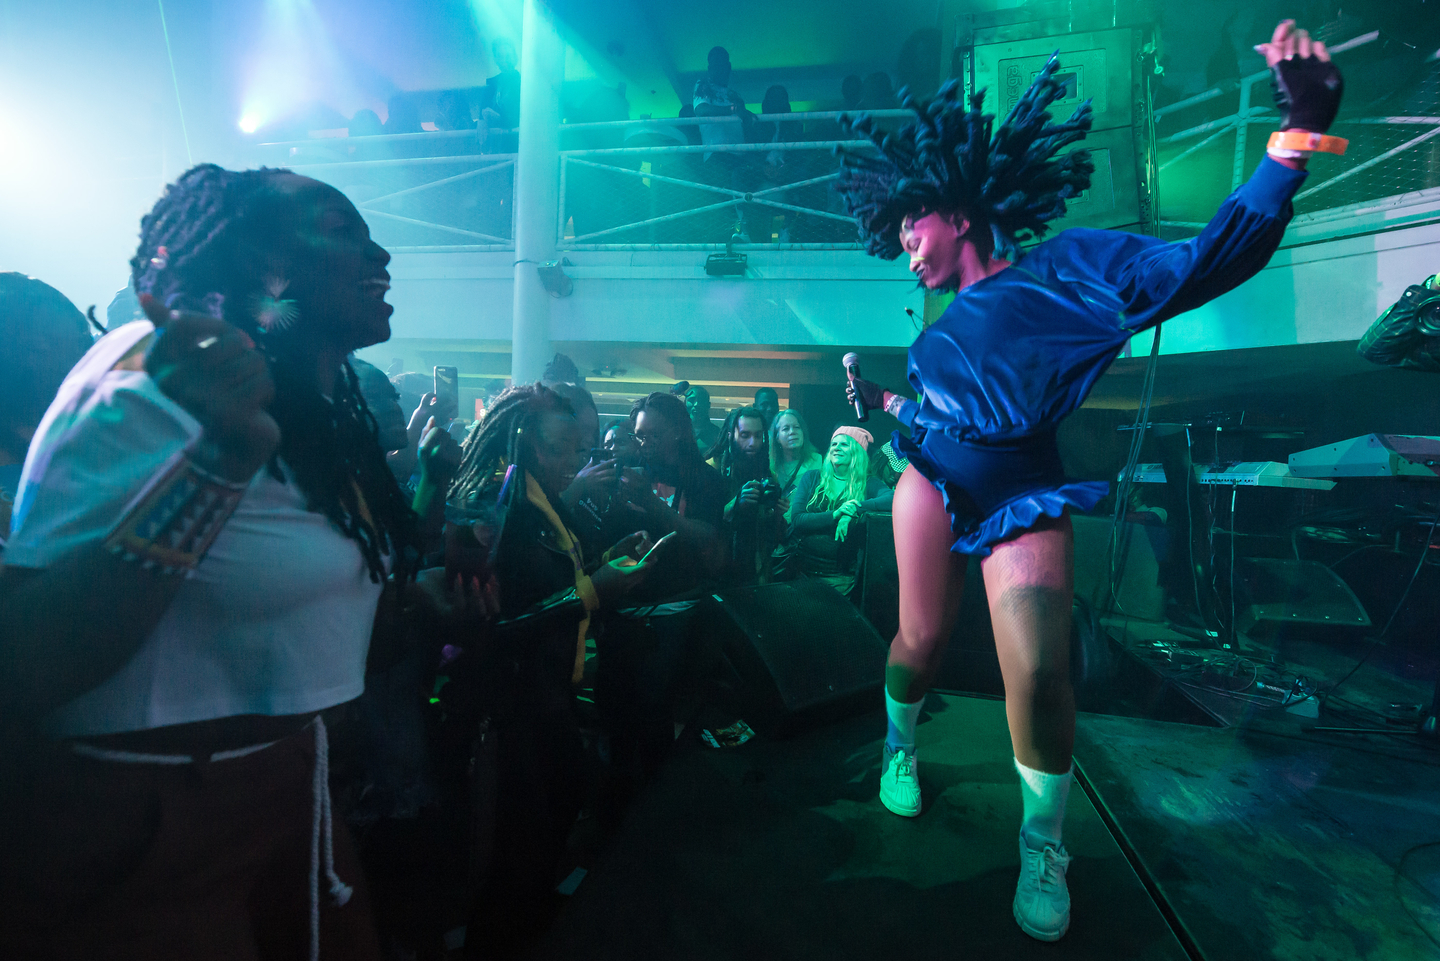 Victoria Kimani at Highland Lounge, presented by Africa To The World presented by Digiwaxx with Bavent Street Live & OkayAfrica – Photo by Joe Cavazos